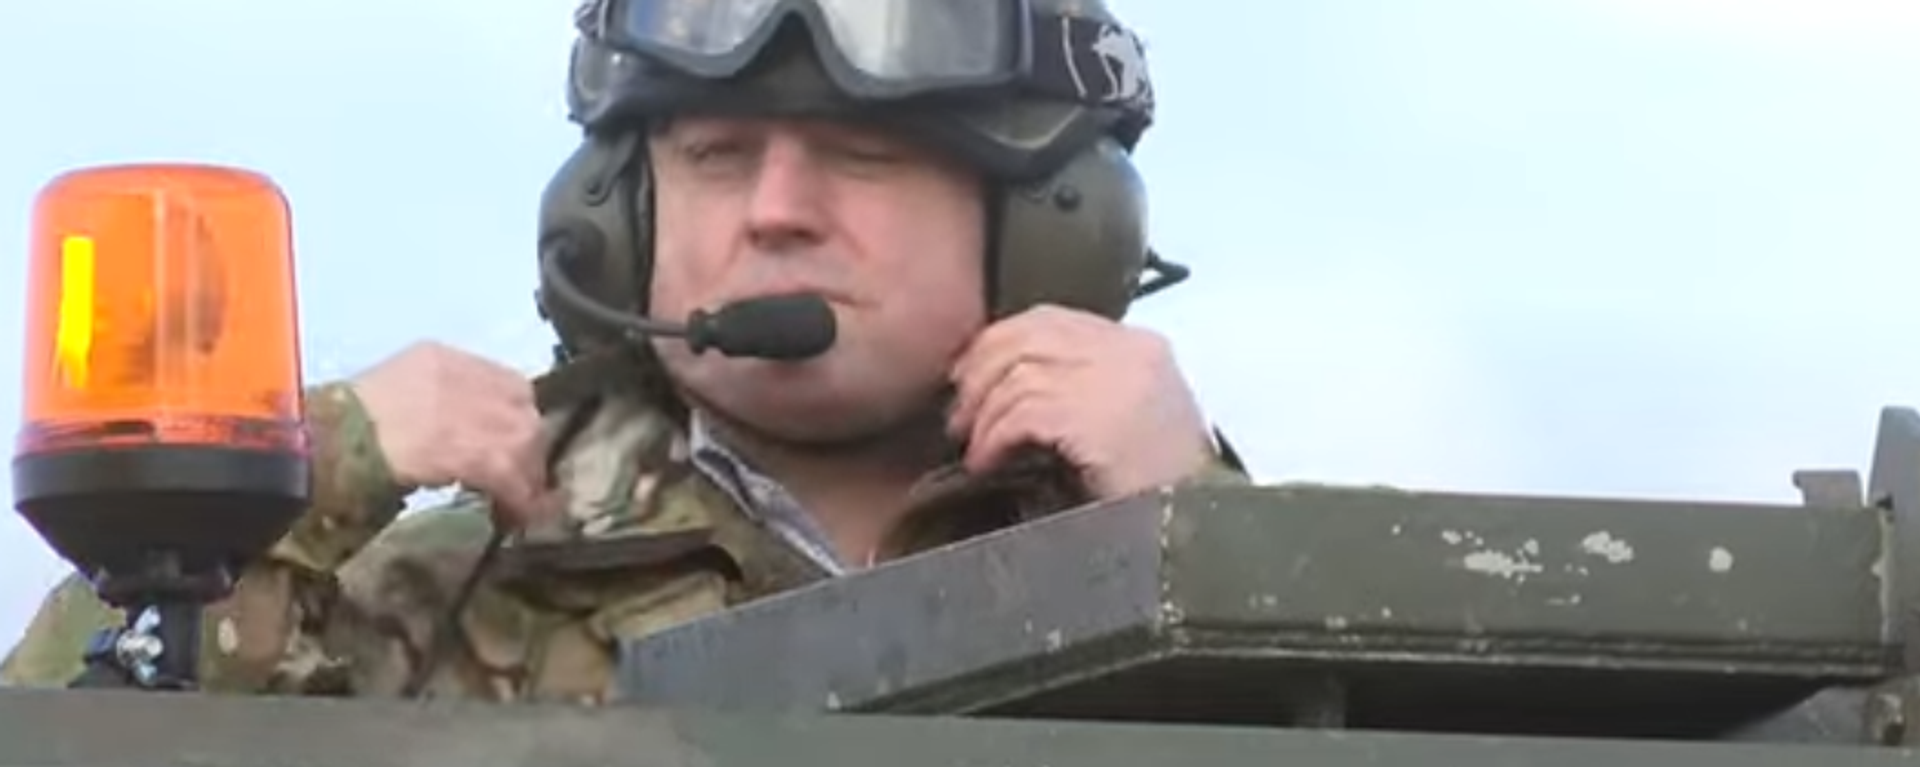 UK Defense Chief Ben Wallace at a photo op visit to a military training camp where Ukrainian tankers are training to use Challenger 2 main battle tanks. Screengrab of Telegraph video. - Sputnik International, 1920, 02.10.2023